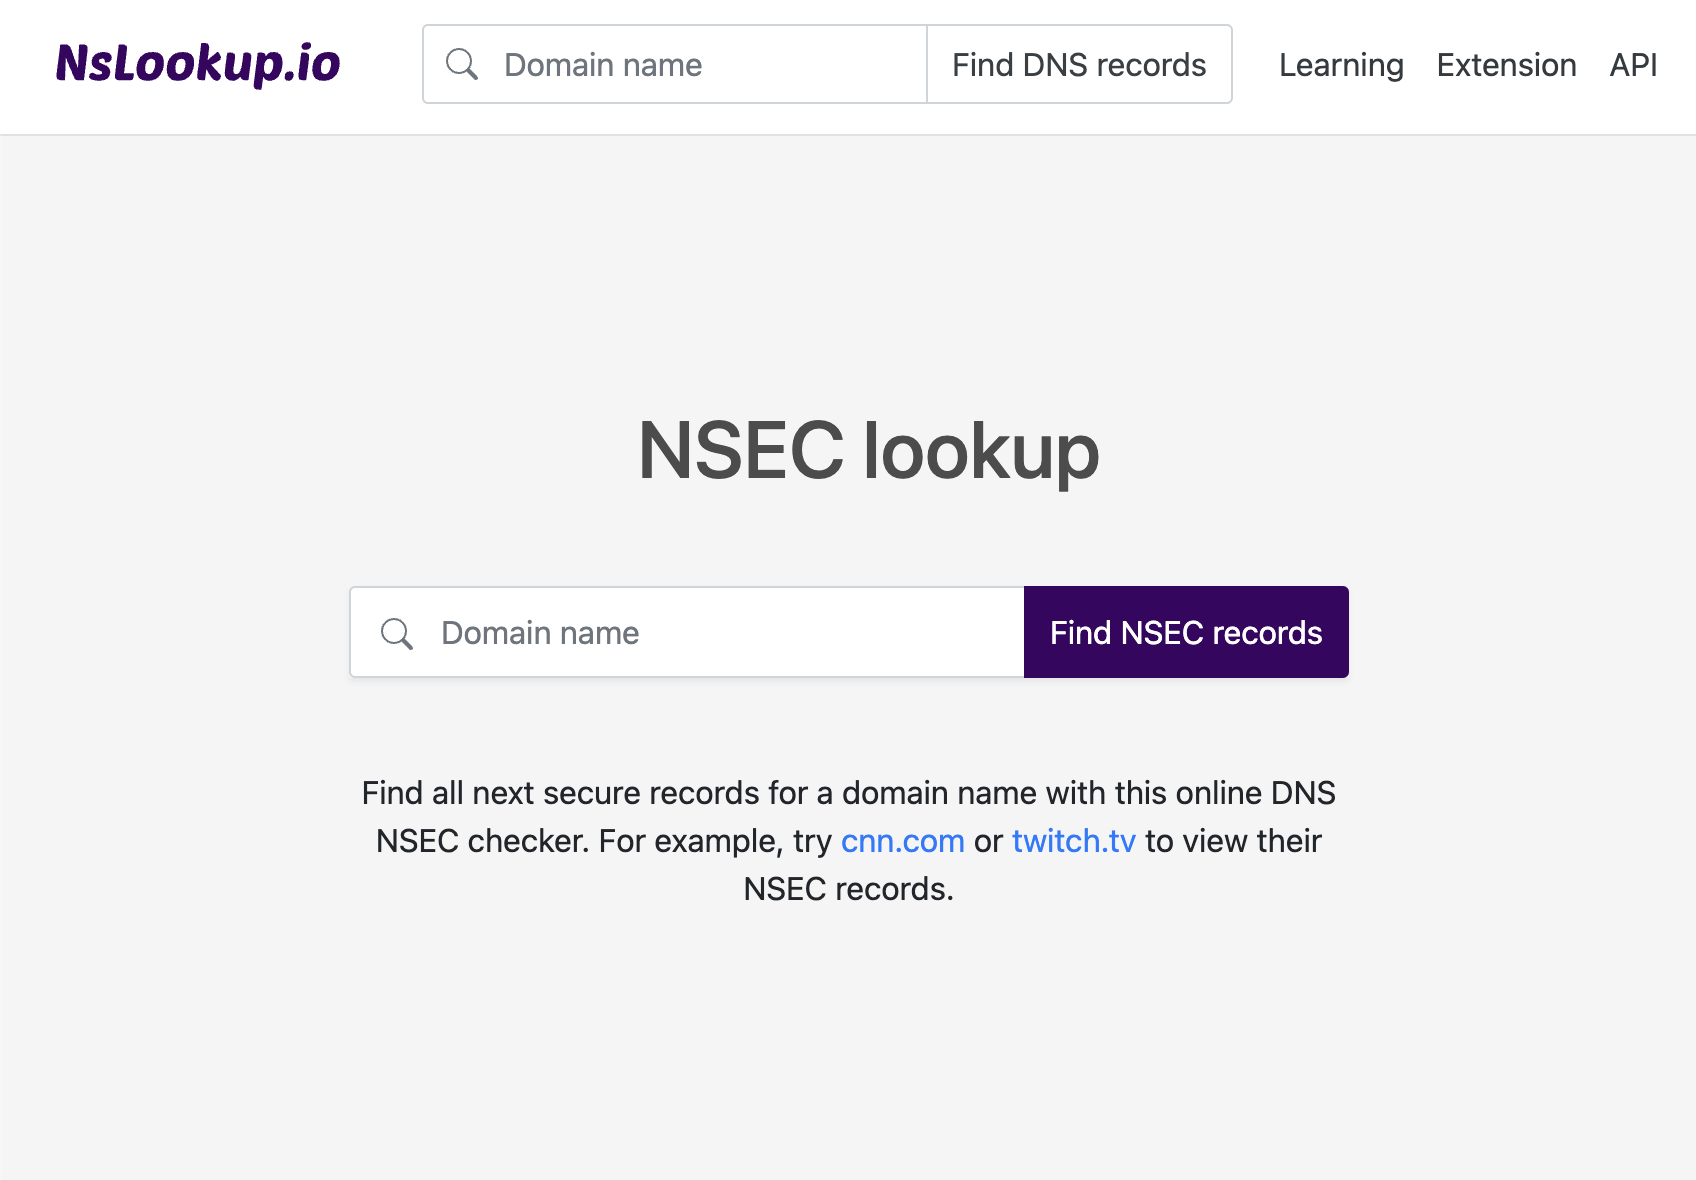 Open the NSEC lookup tool